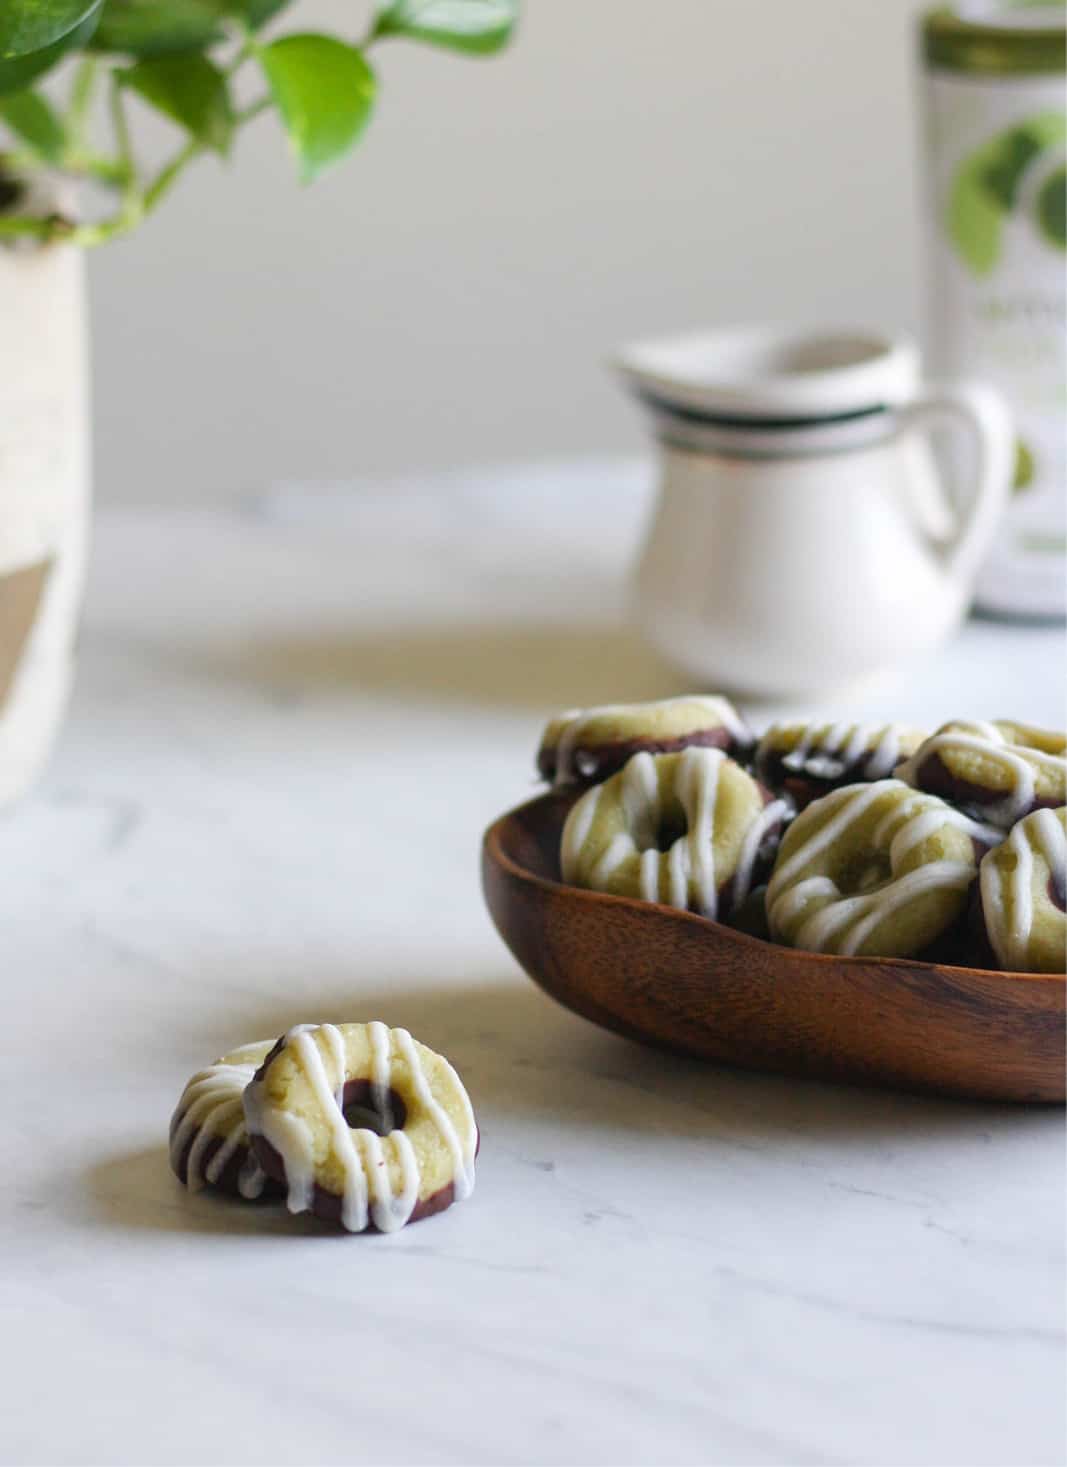 These Matcha Latte Protein Bites are a delicious way to get a little caffeine + protein from my snack or dessert. They are #keto, #paleo, #aip, and #whole30 friendly! #proteinbar #matcha